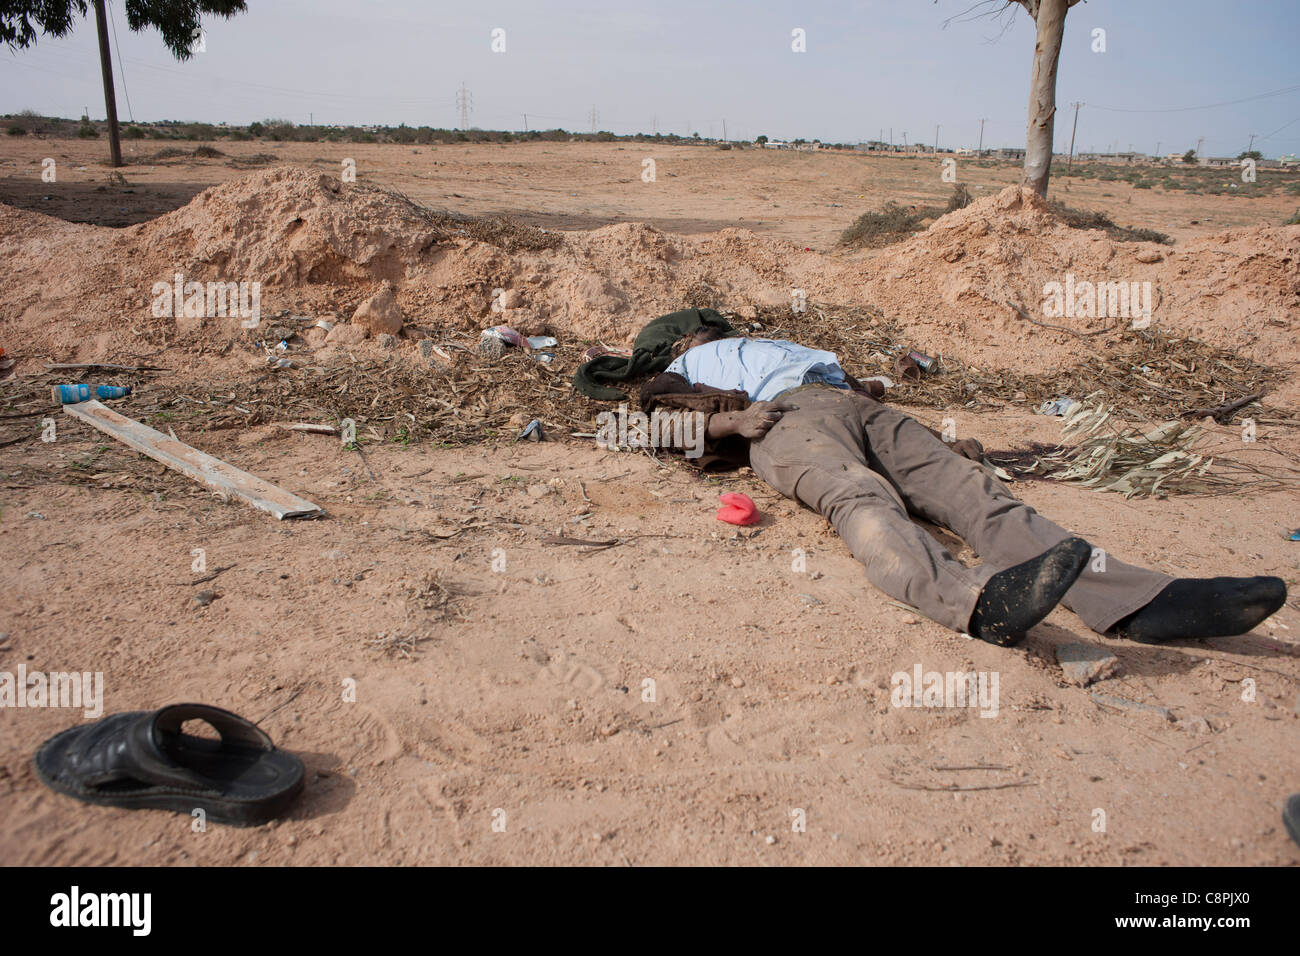 One of colonel Gaddafis guards lays dead in the streets on Sirt after a NATO air strike on Gaddafi convoy. Stock Photo